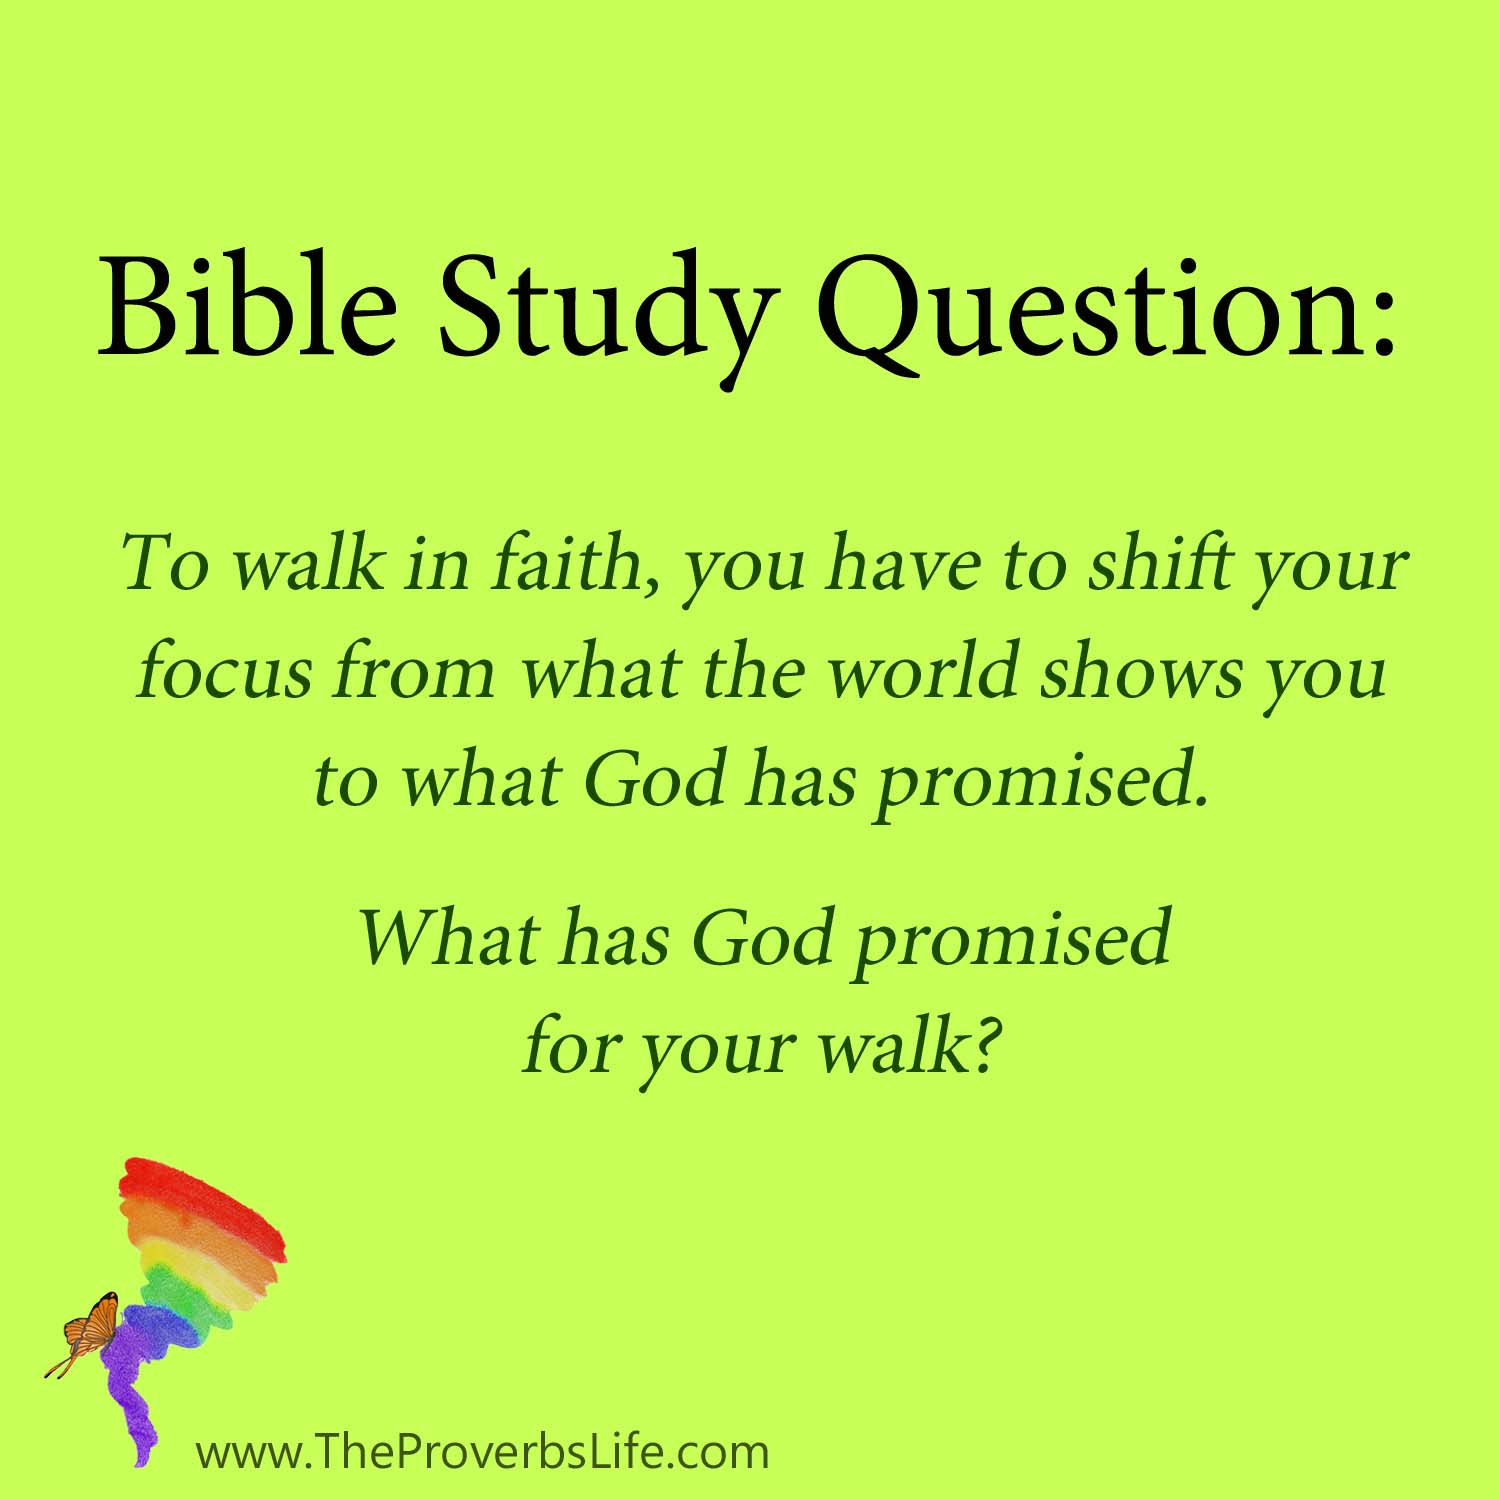 Bible Study Questions - what has God promised